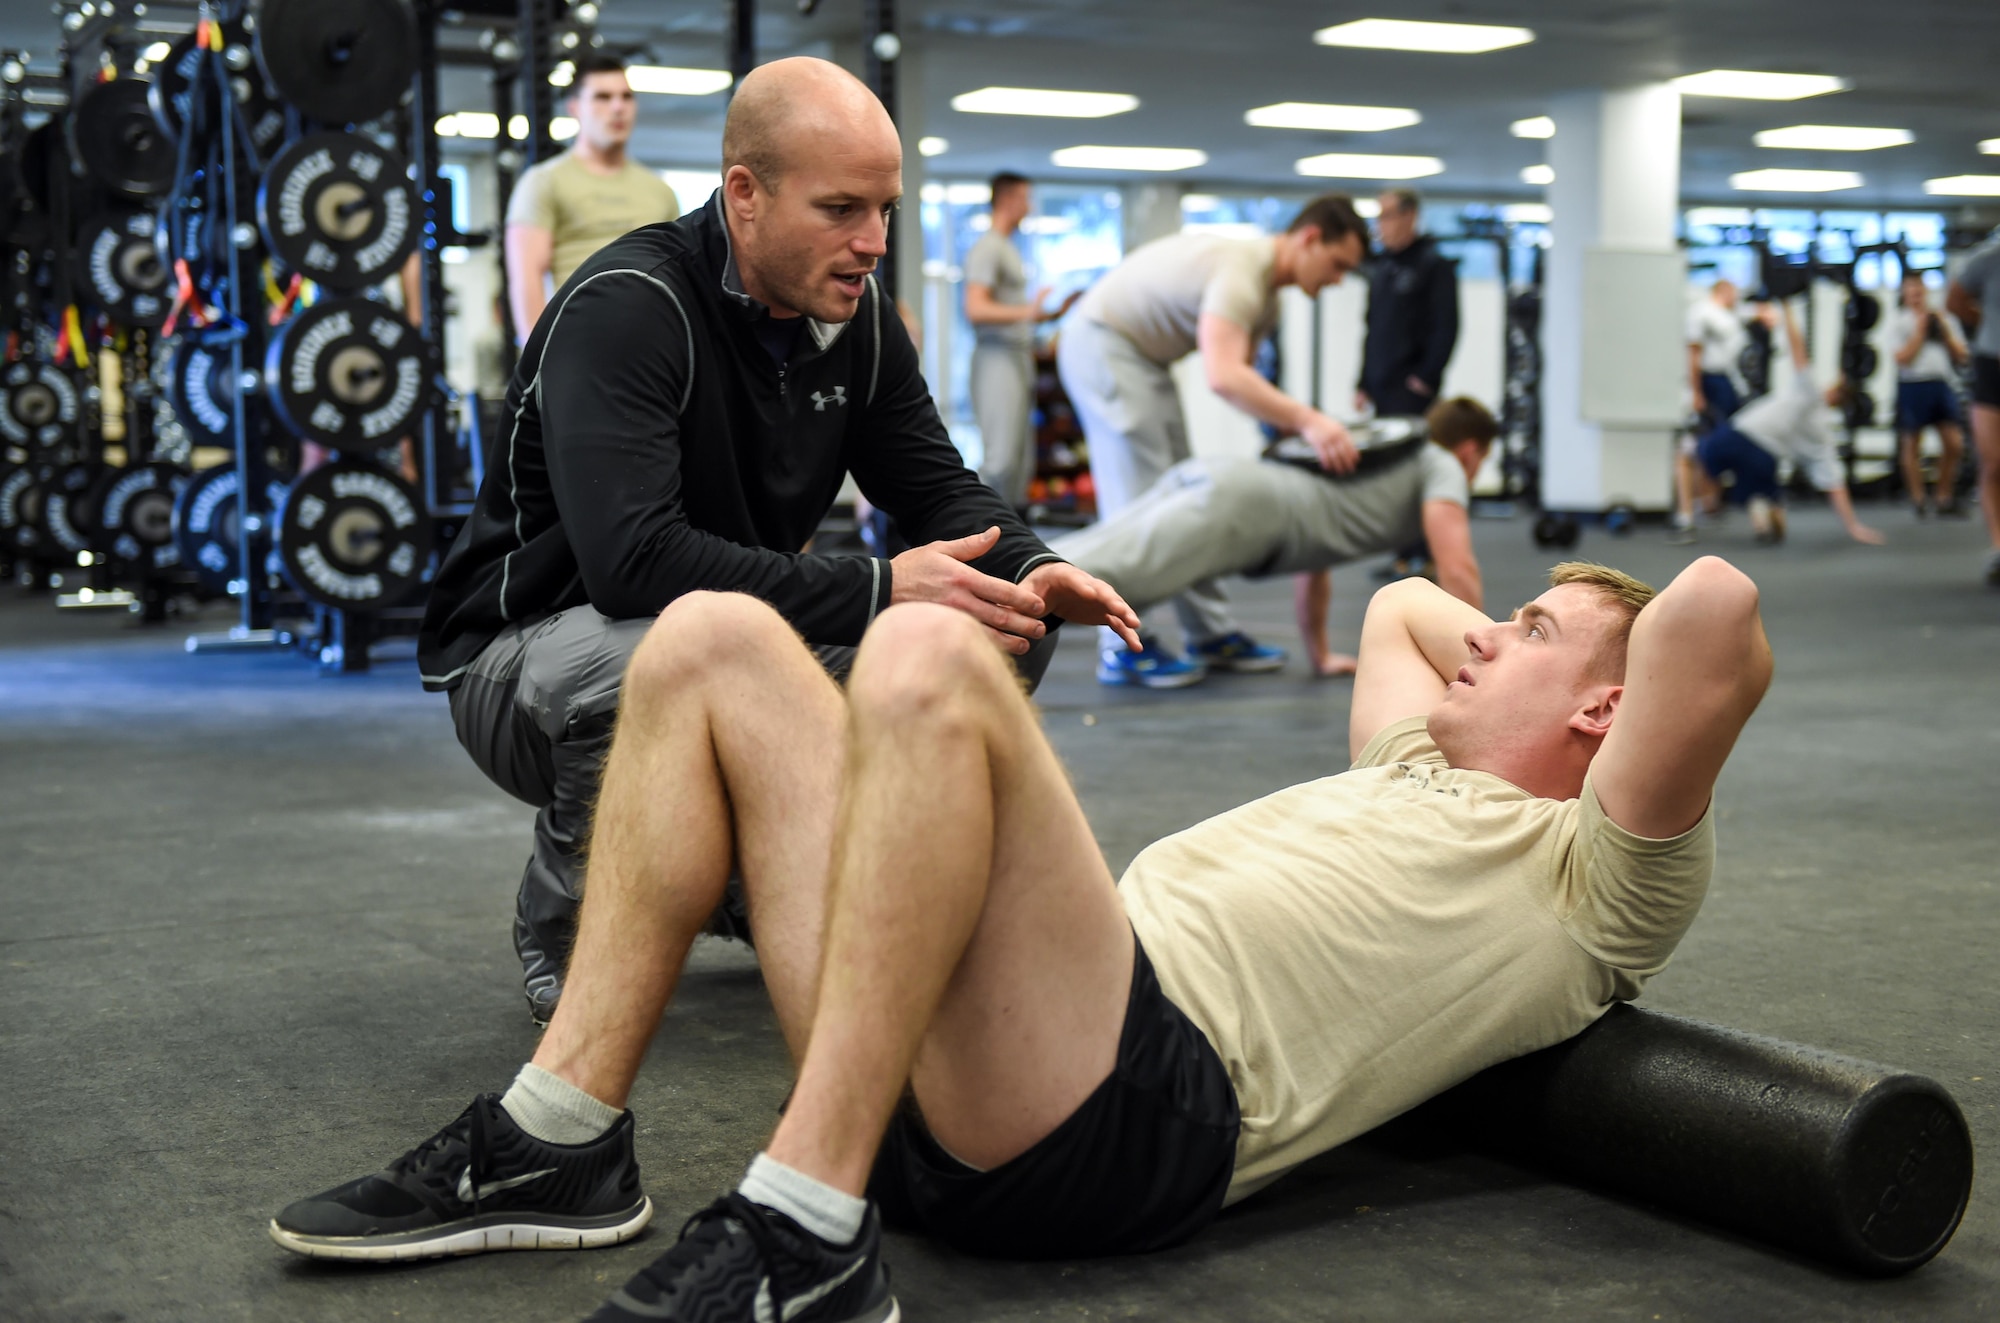 David Koch, an embedded athletic trainer with the 59th Medical Wing’s VIPER Clinic, monitors Airman 1st Class Michael Ferrari, a student with the 342nd Training Squadron, during stretching exercises, Jan. 27, 2016, at the Battle Gym on Joint Base San Antonio-Lackland, Texas. Four athletic trainers are working with students at the 342nd and 343rd Training Squadrons to determine the effectiveness of embedding athletic trainers into military physical training programs. If successful, the initiative could potentially reshape how injured trainees receive care. (U.S. Air Force photo/Staff Sgt. Michael Ellis)